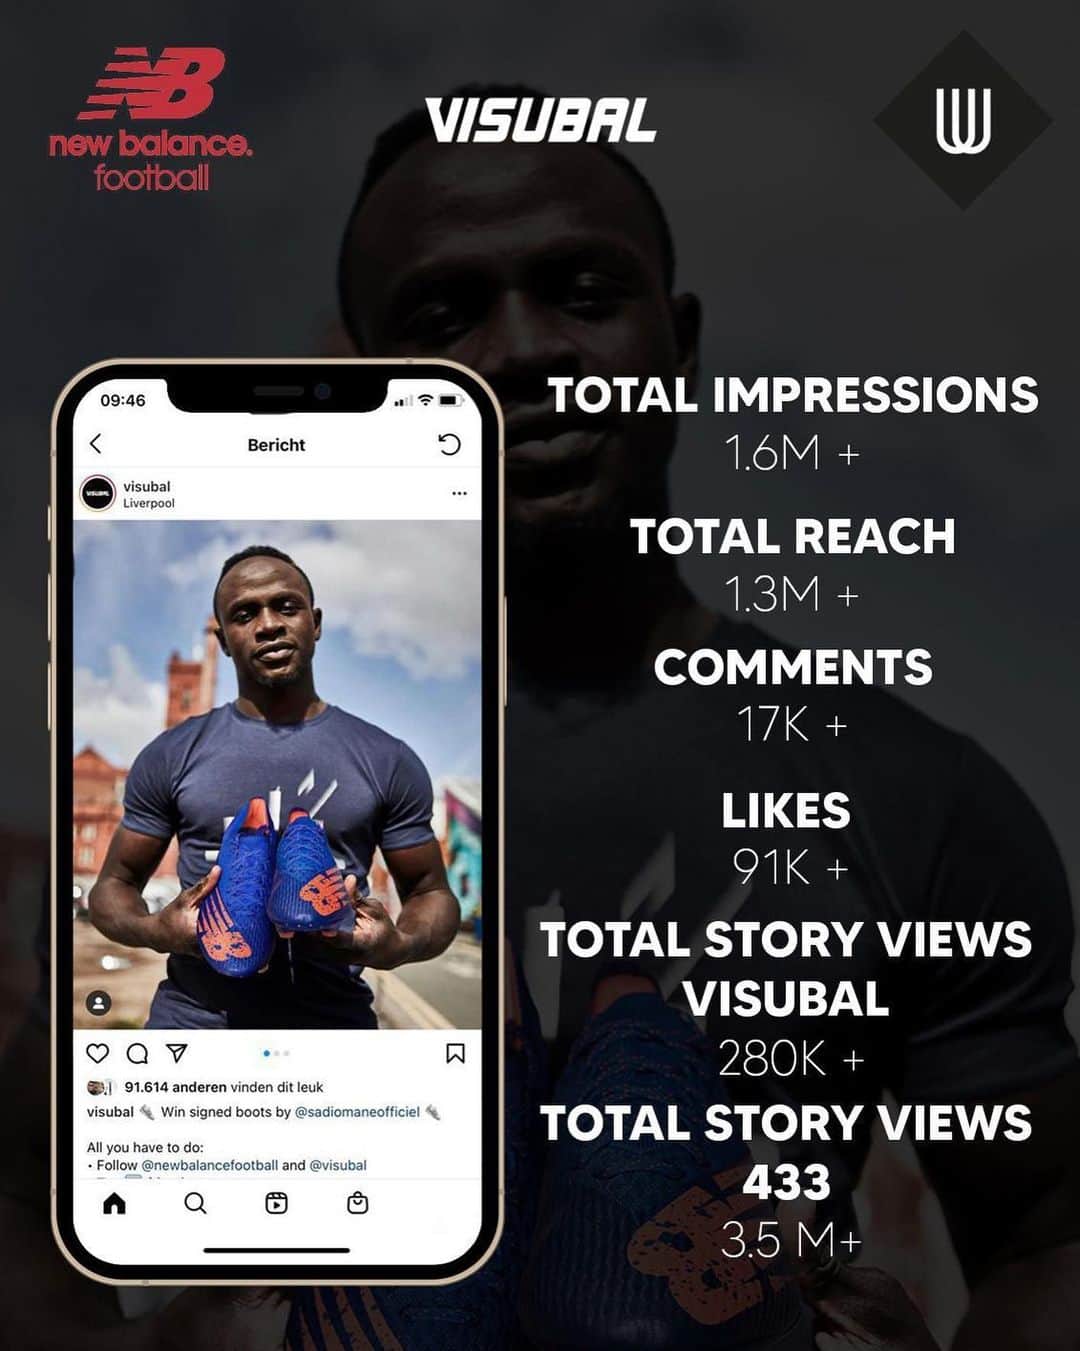 Wannahavesのインスタグラム：「New Balance X Visubal X Wannahaves  A first collaboration between Visubal and New Balance organised by Wannahaves. 👇  A giveaway of signed shoes together with Sadio Mane. ⚽️Pleasant cooperation and excellent results.  If you see any opportunities for your own brand, send an email to michael@wannahaves.com 📩  #wannahaves #newbalance #visubal #sadiomane #liverpool」